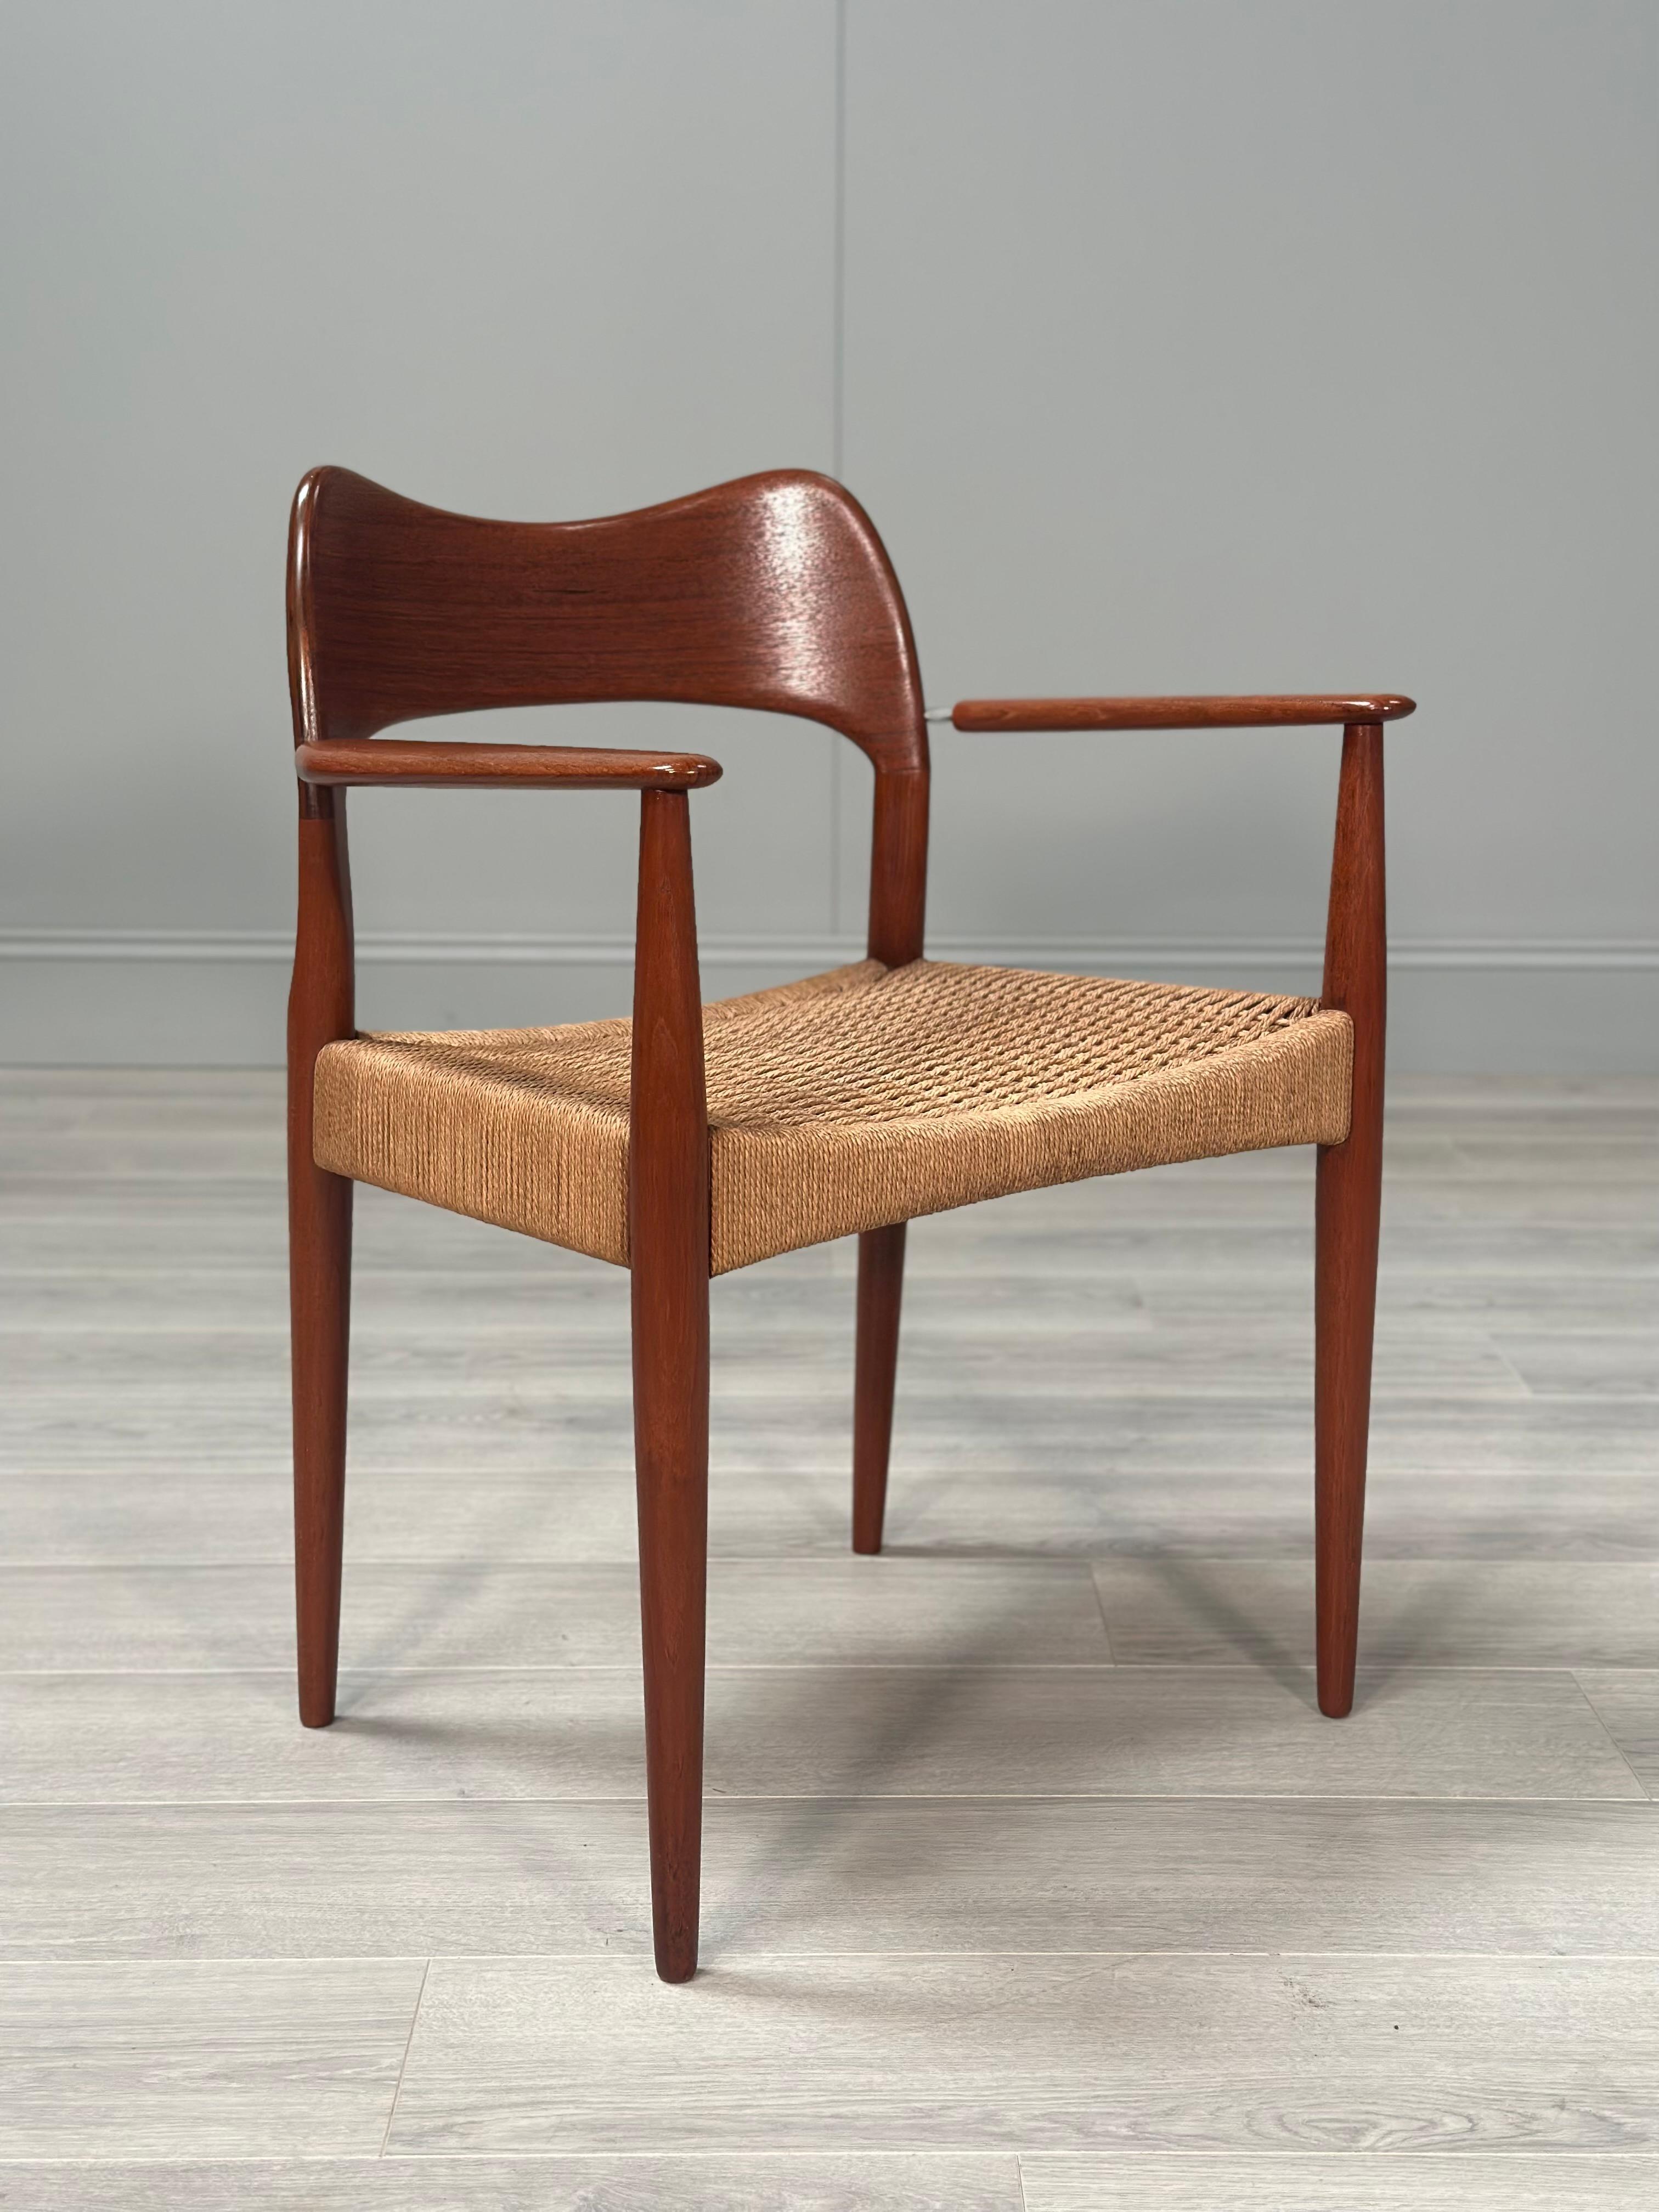 Mid-20th Century Set of 6 Danish Teak And Paper Cord Dining Chairs Designed By Arne Hovmand Olsen